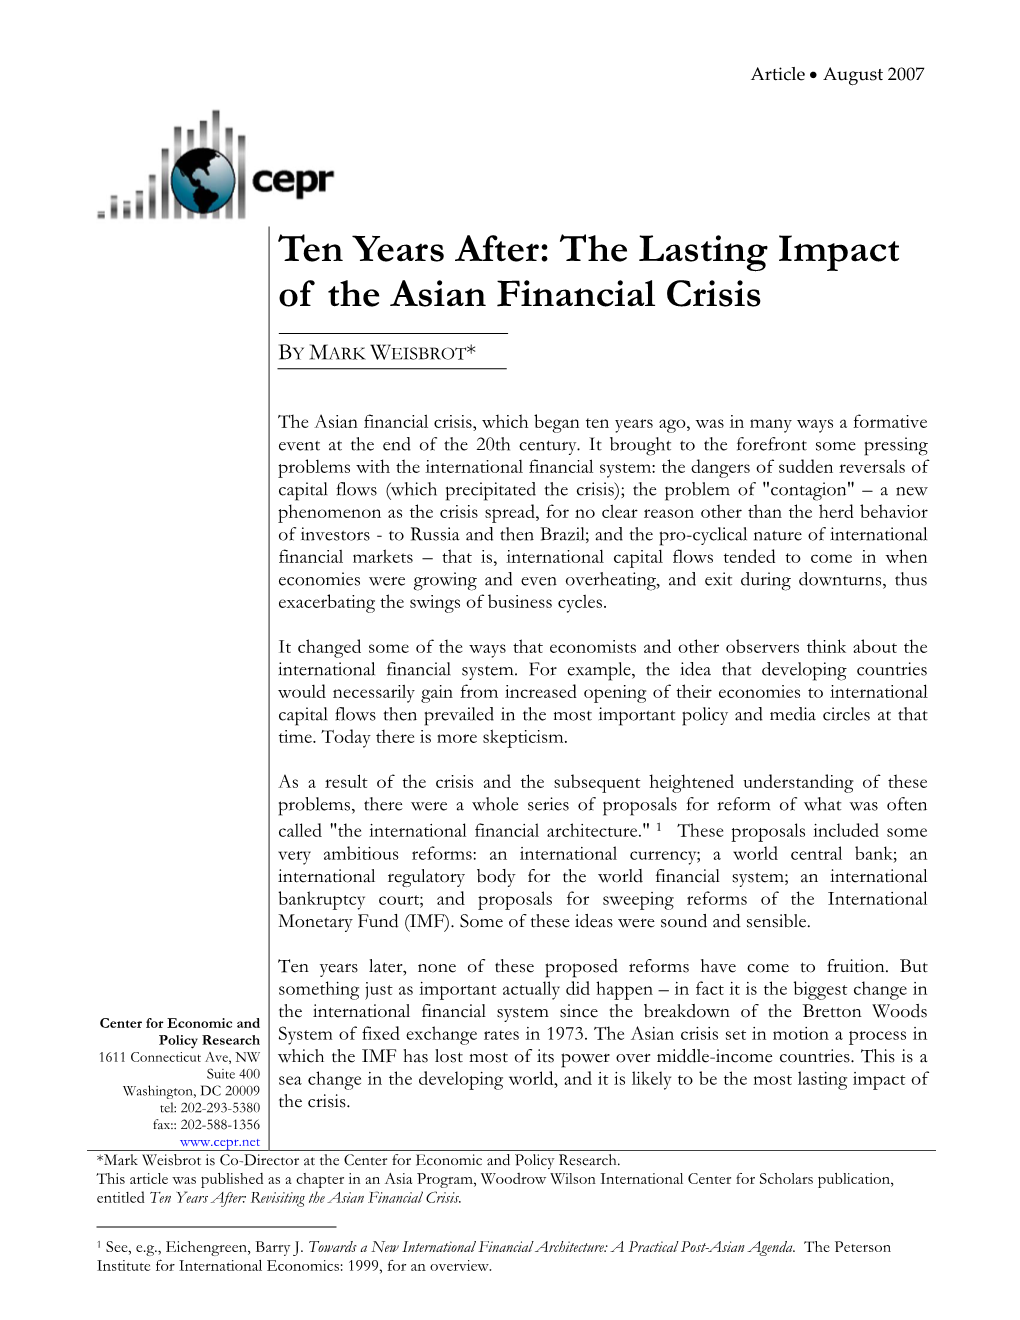 Ten Years After: the Lasting Impact of the Asian Financial Crisis